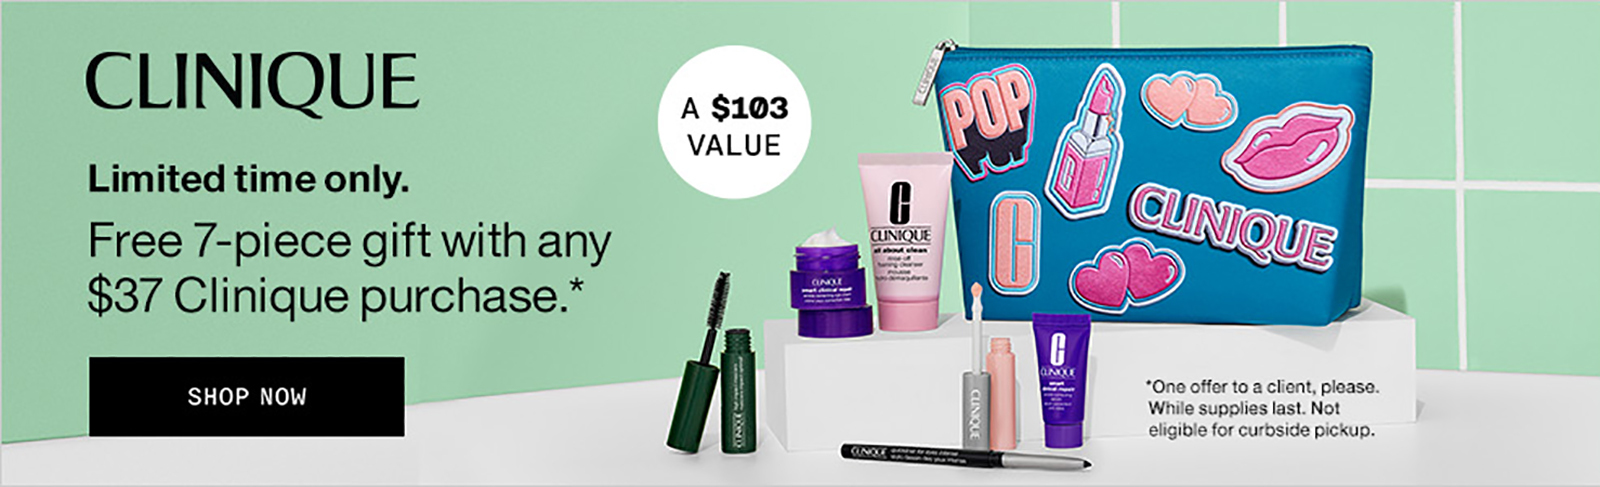 Free 7 pc. Gift with any $37 Clinique purchase.